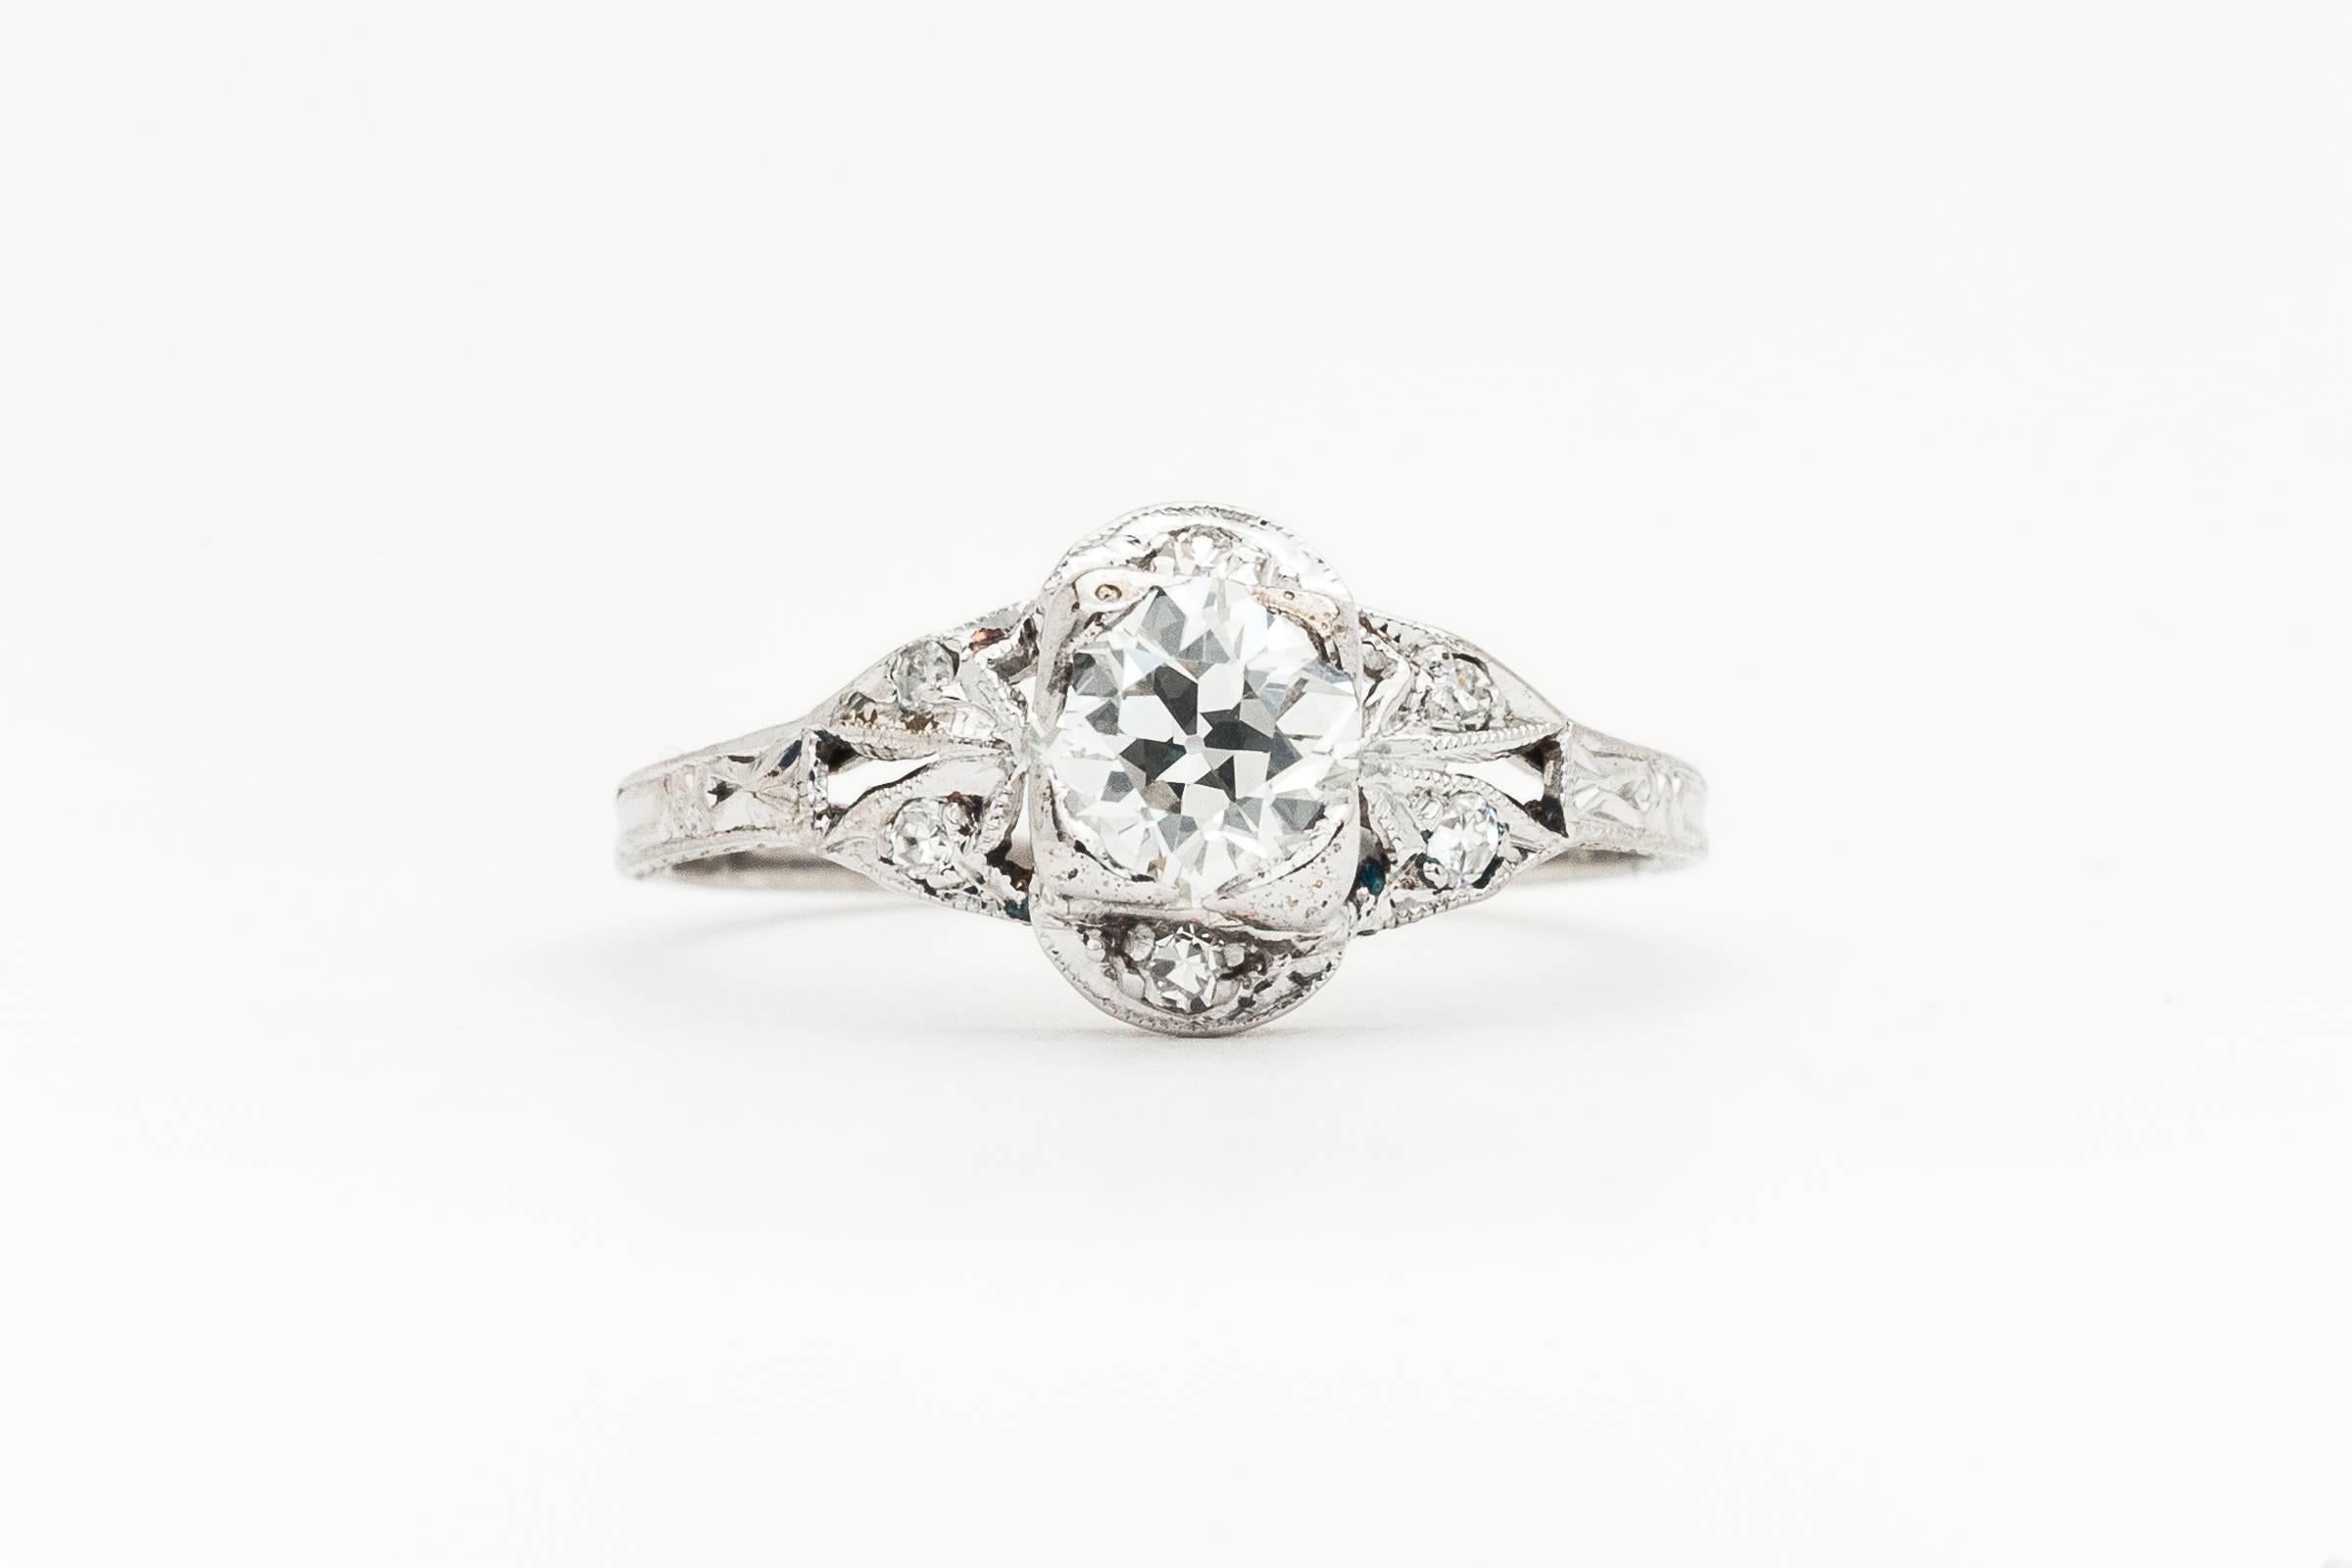 A beautiful art deco period diamond engagement ring in luxurious platinum. Centered by a sparkling old European cut diamond of very fine quality, this ring features a beautifully hand engraved platinum mounting adorned with accenting diamonds